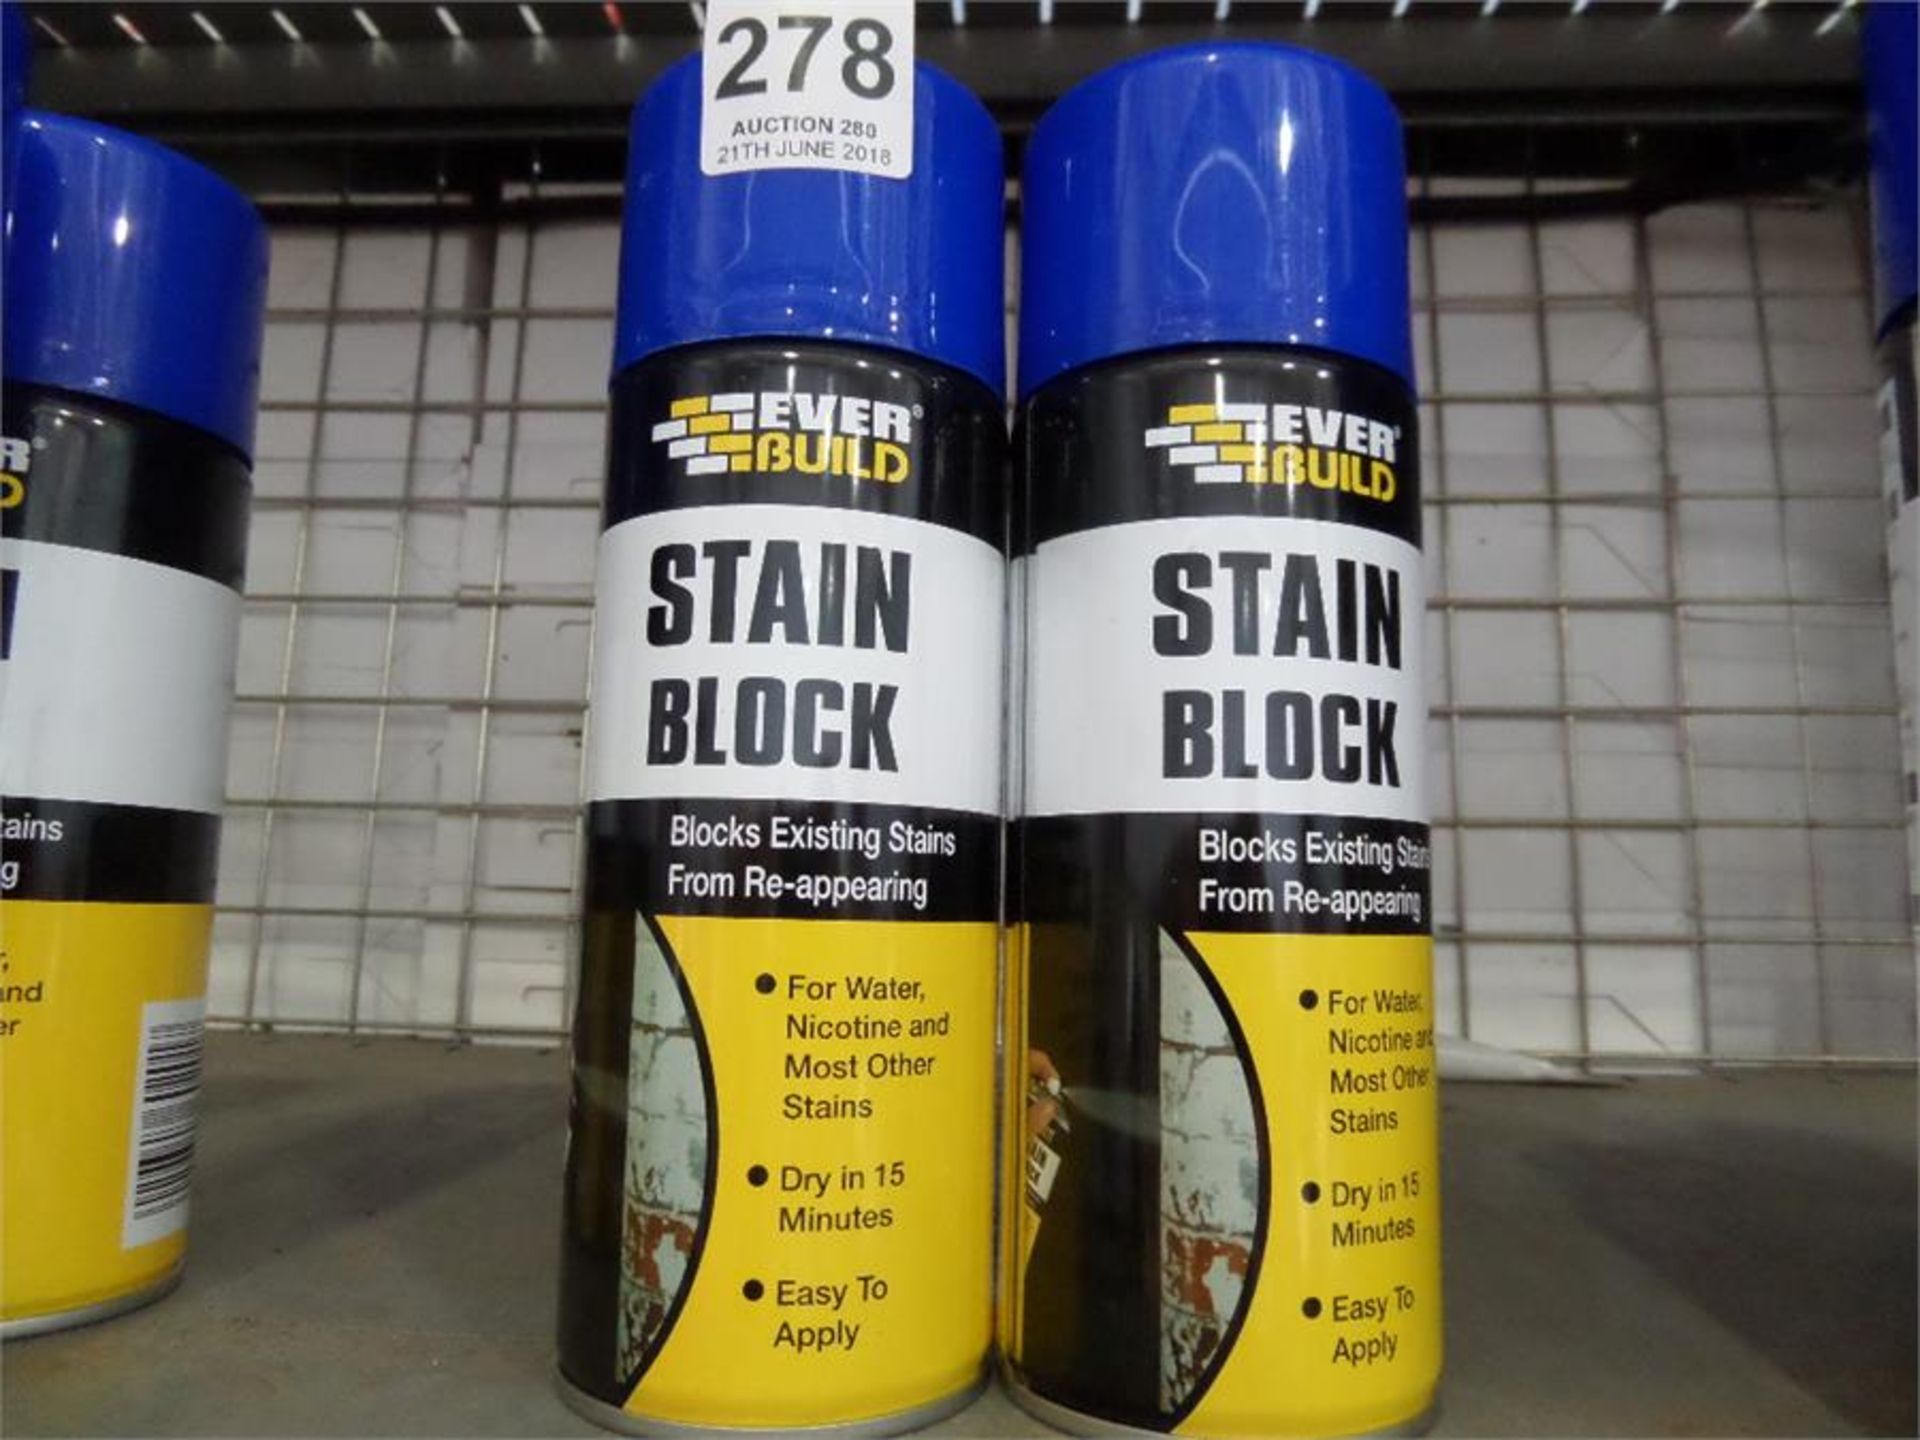 2 CANS OF STAIN BLOCK (NEW SHOP CLEARANCE STOCK)